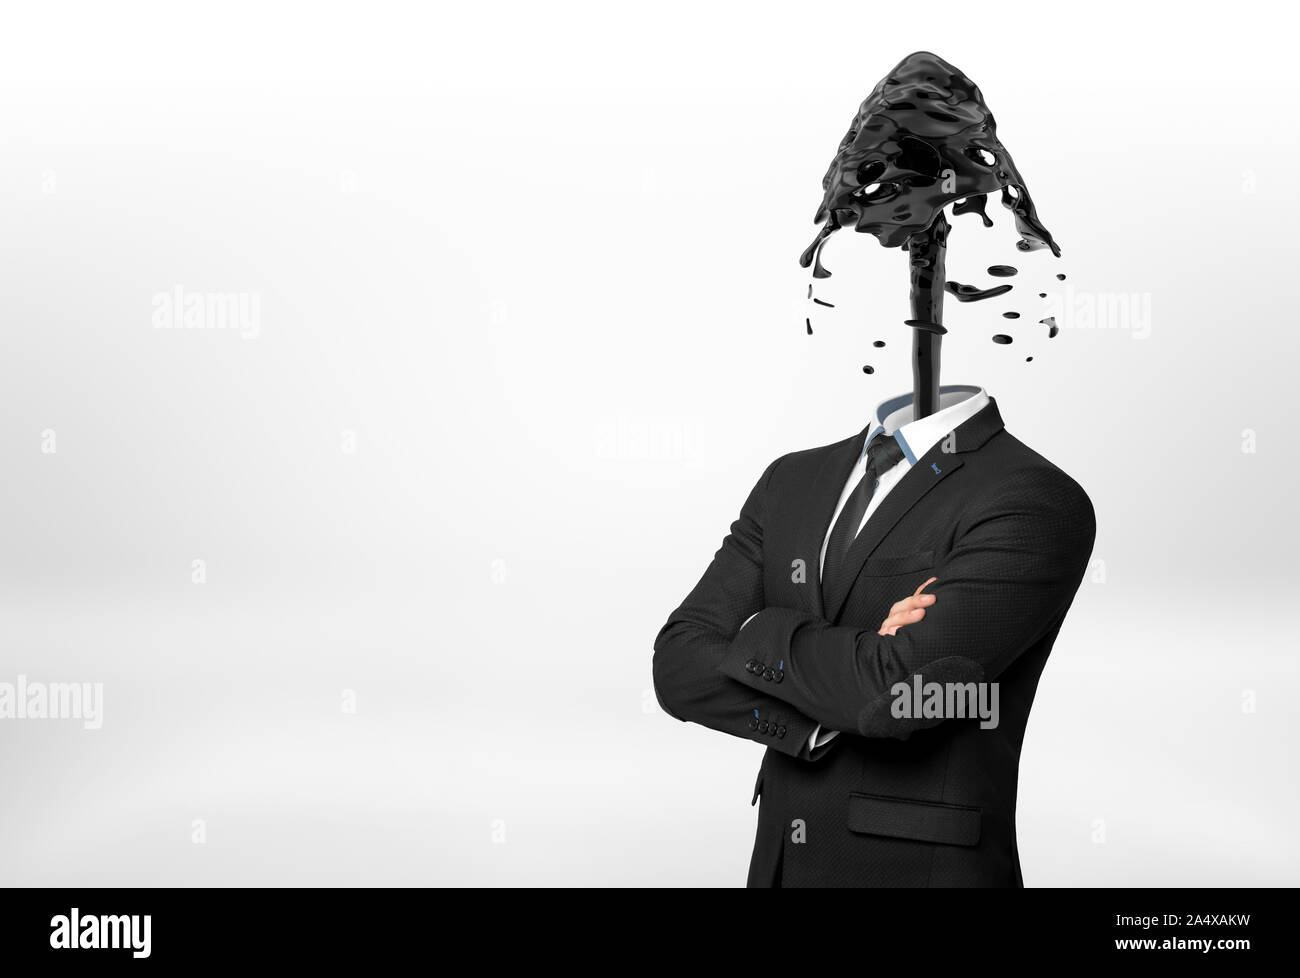 A businessman with crossed hands on white background has his head replaces with a fountain of black oil. Stock Photo